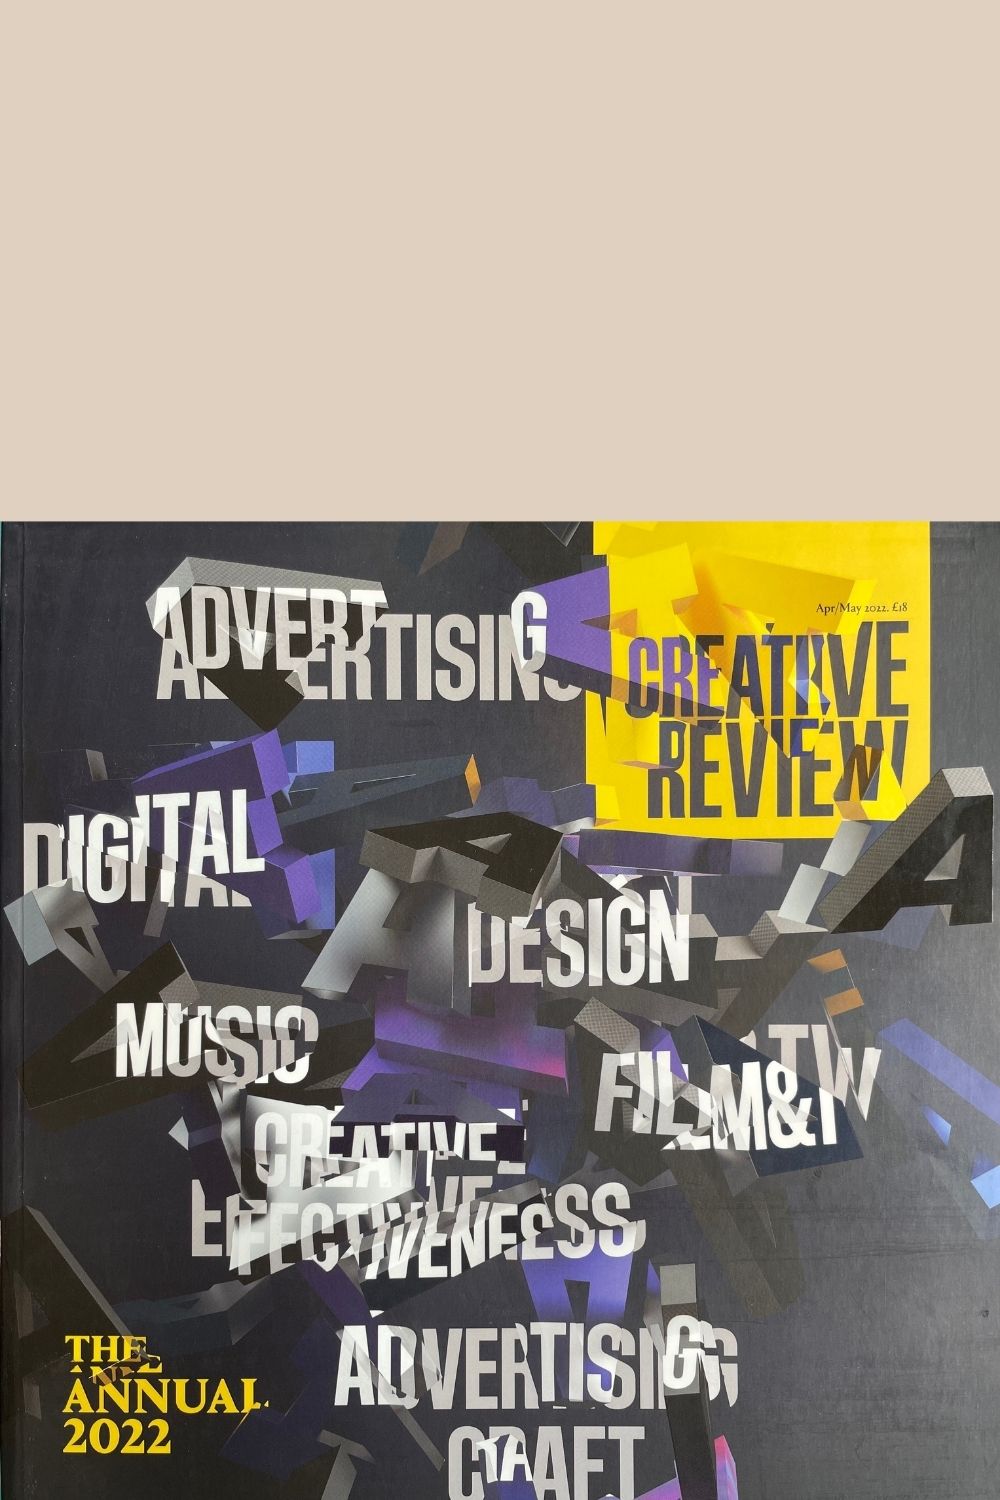 Creative Review April/May 2022: The Annual 2022